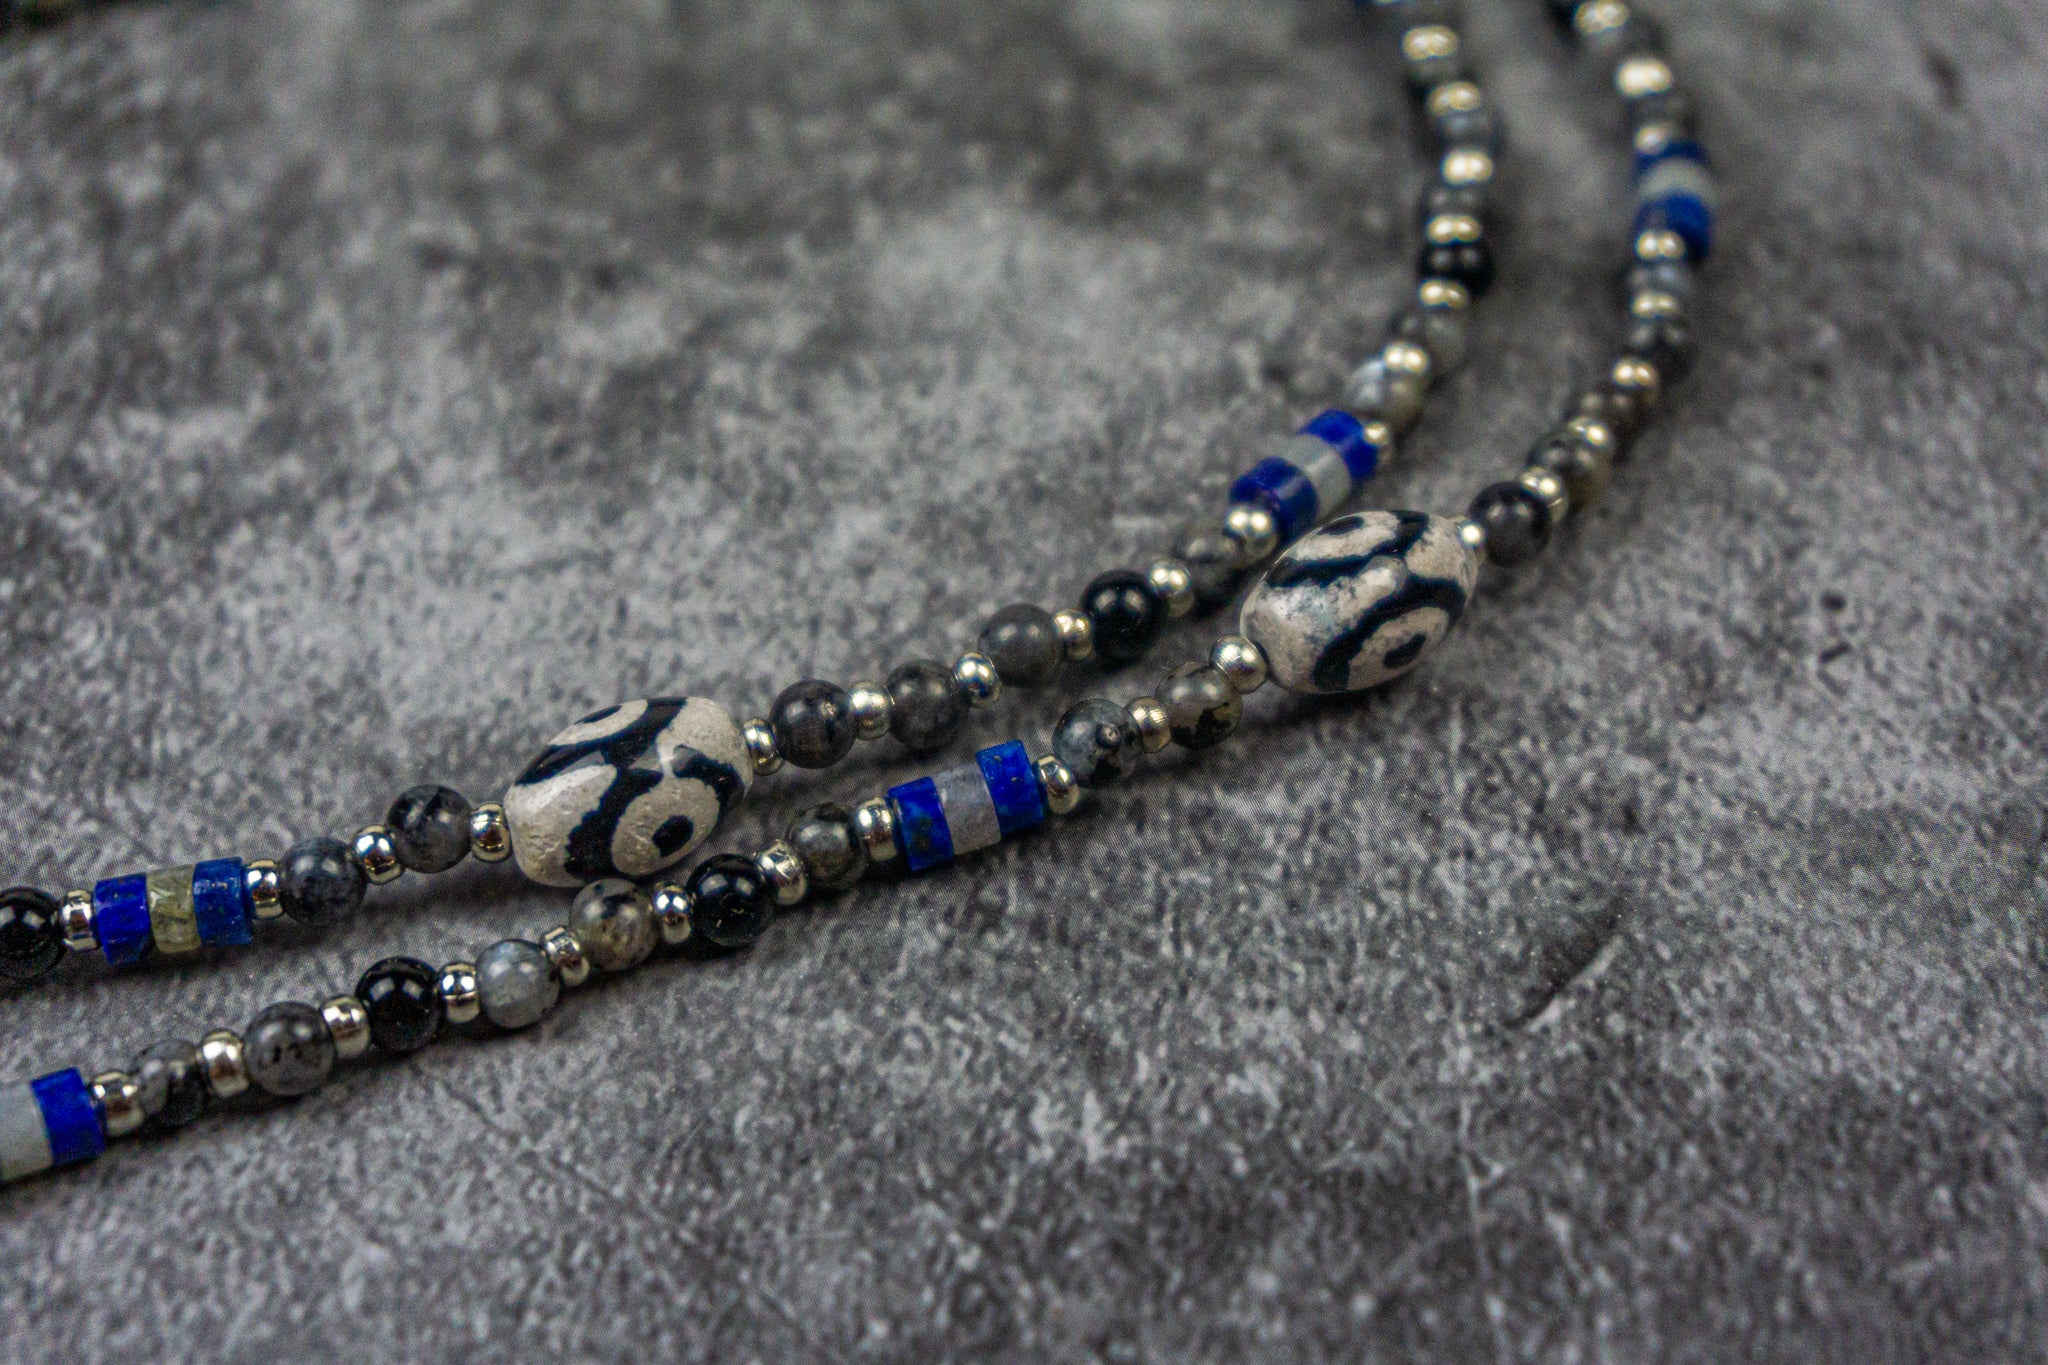 third eye agate beads in a boho necklace made of labrdorite, onyx and lapis lazuli gemstone, with stainless steel spacer beads-  wander jewellery